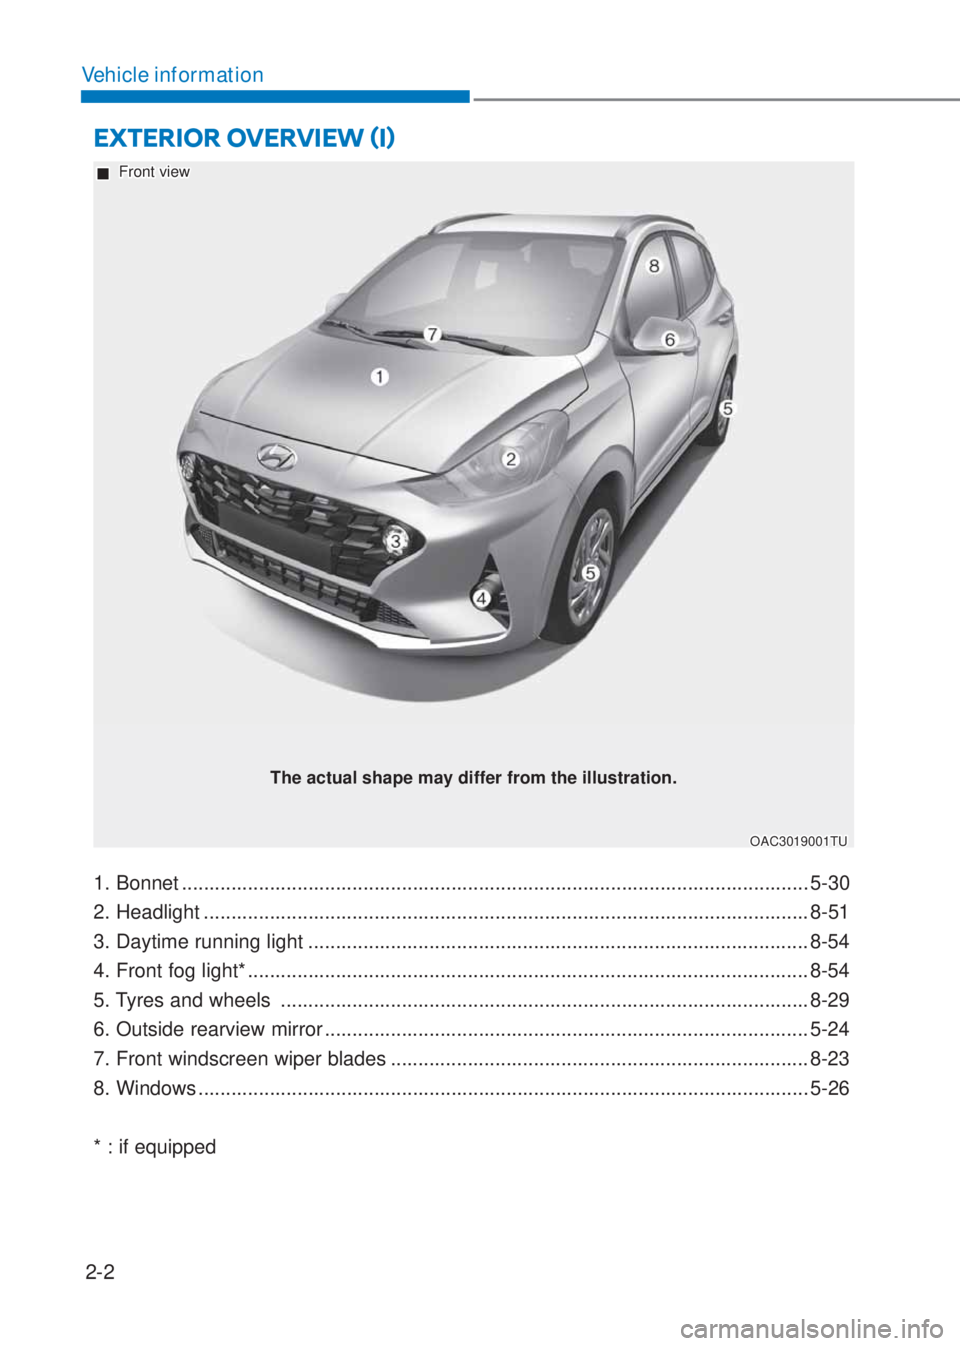 HYUNDAI I10 2023 User Guide 2-2
Vehicle information
E�;TERIOR OVERVIEW ãIä
1. Bonnet .................................................................................................................. 5-30
2. Headlight ......